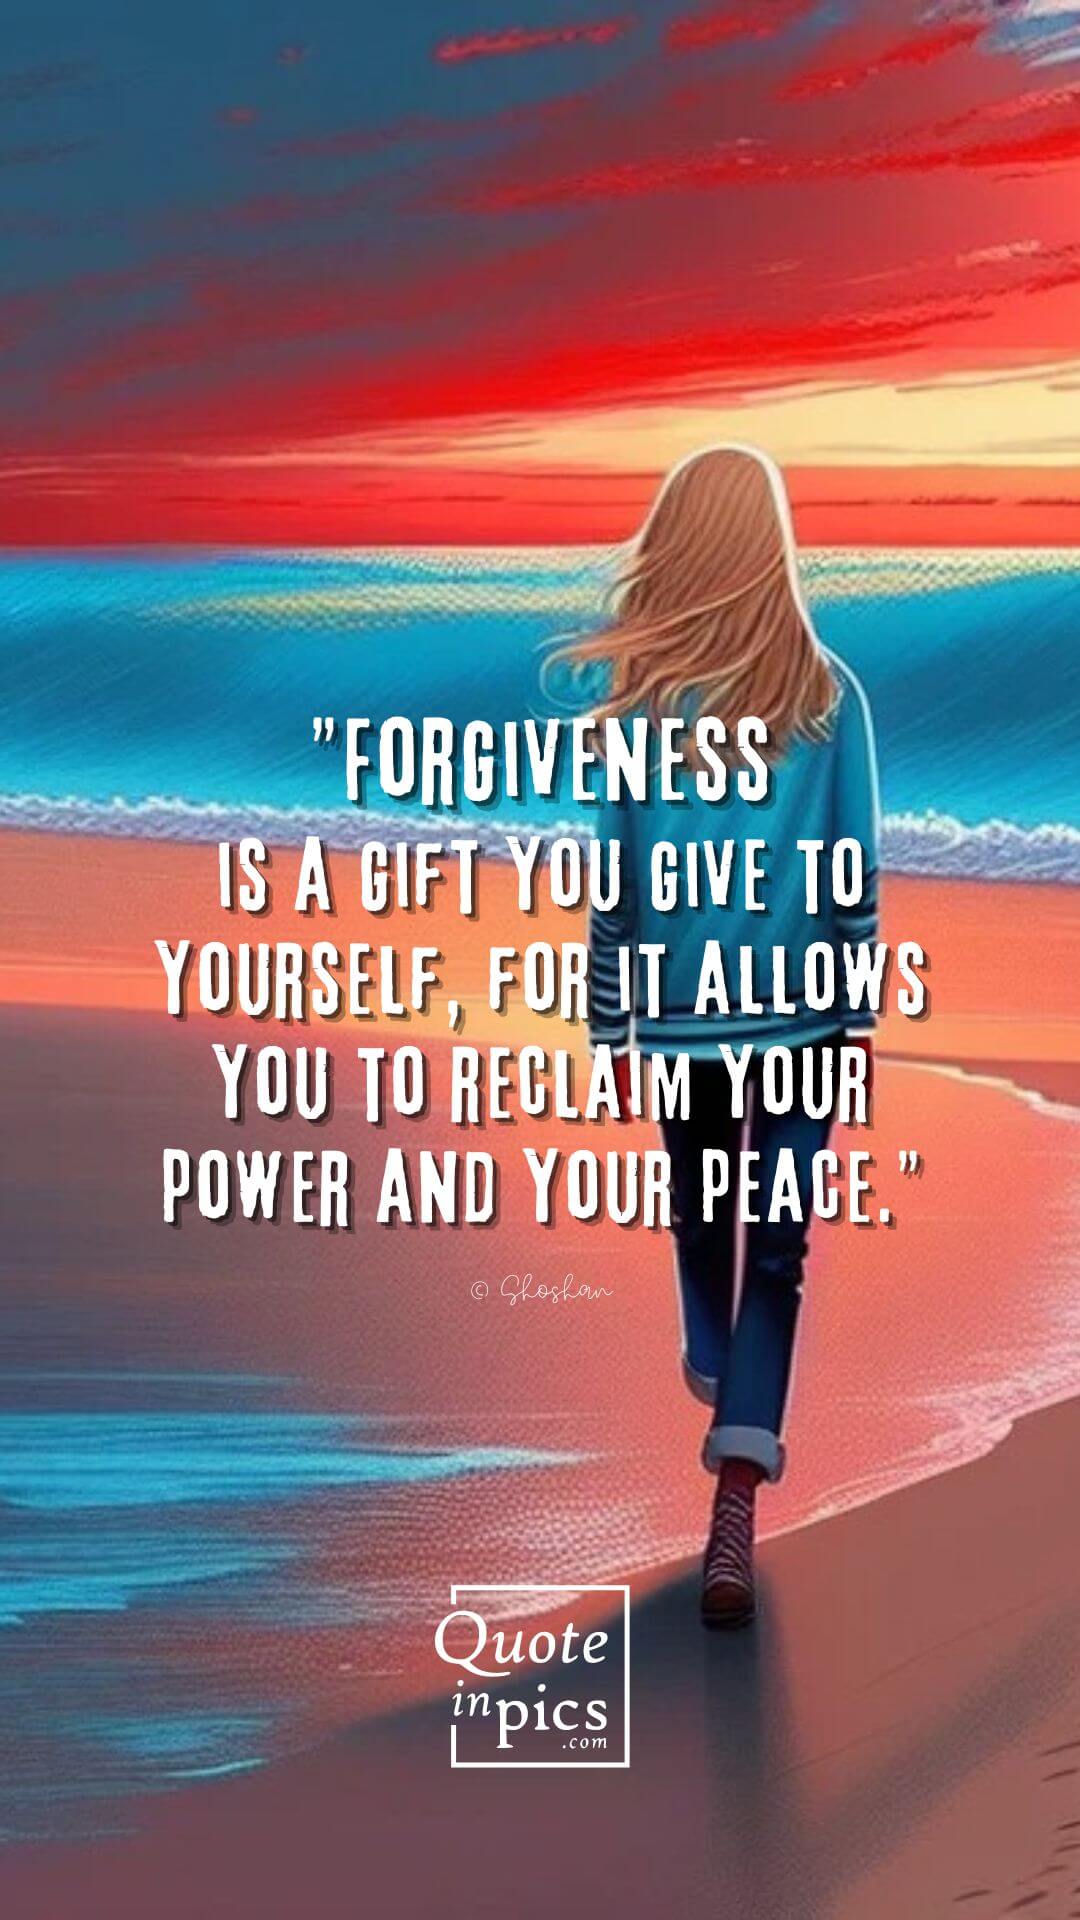 Forgiveness is a gift you give to yourself, for it allows you to reclaim your power and your peace.